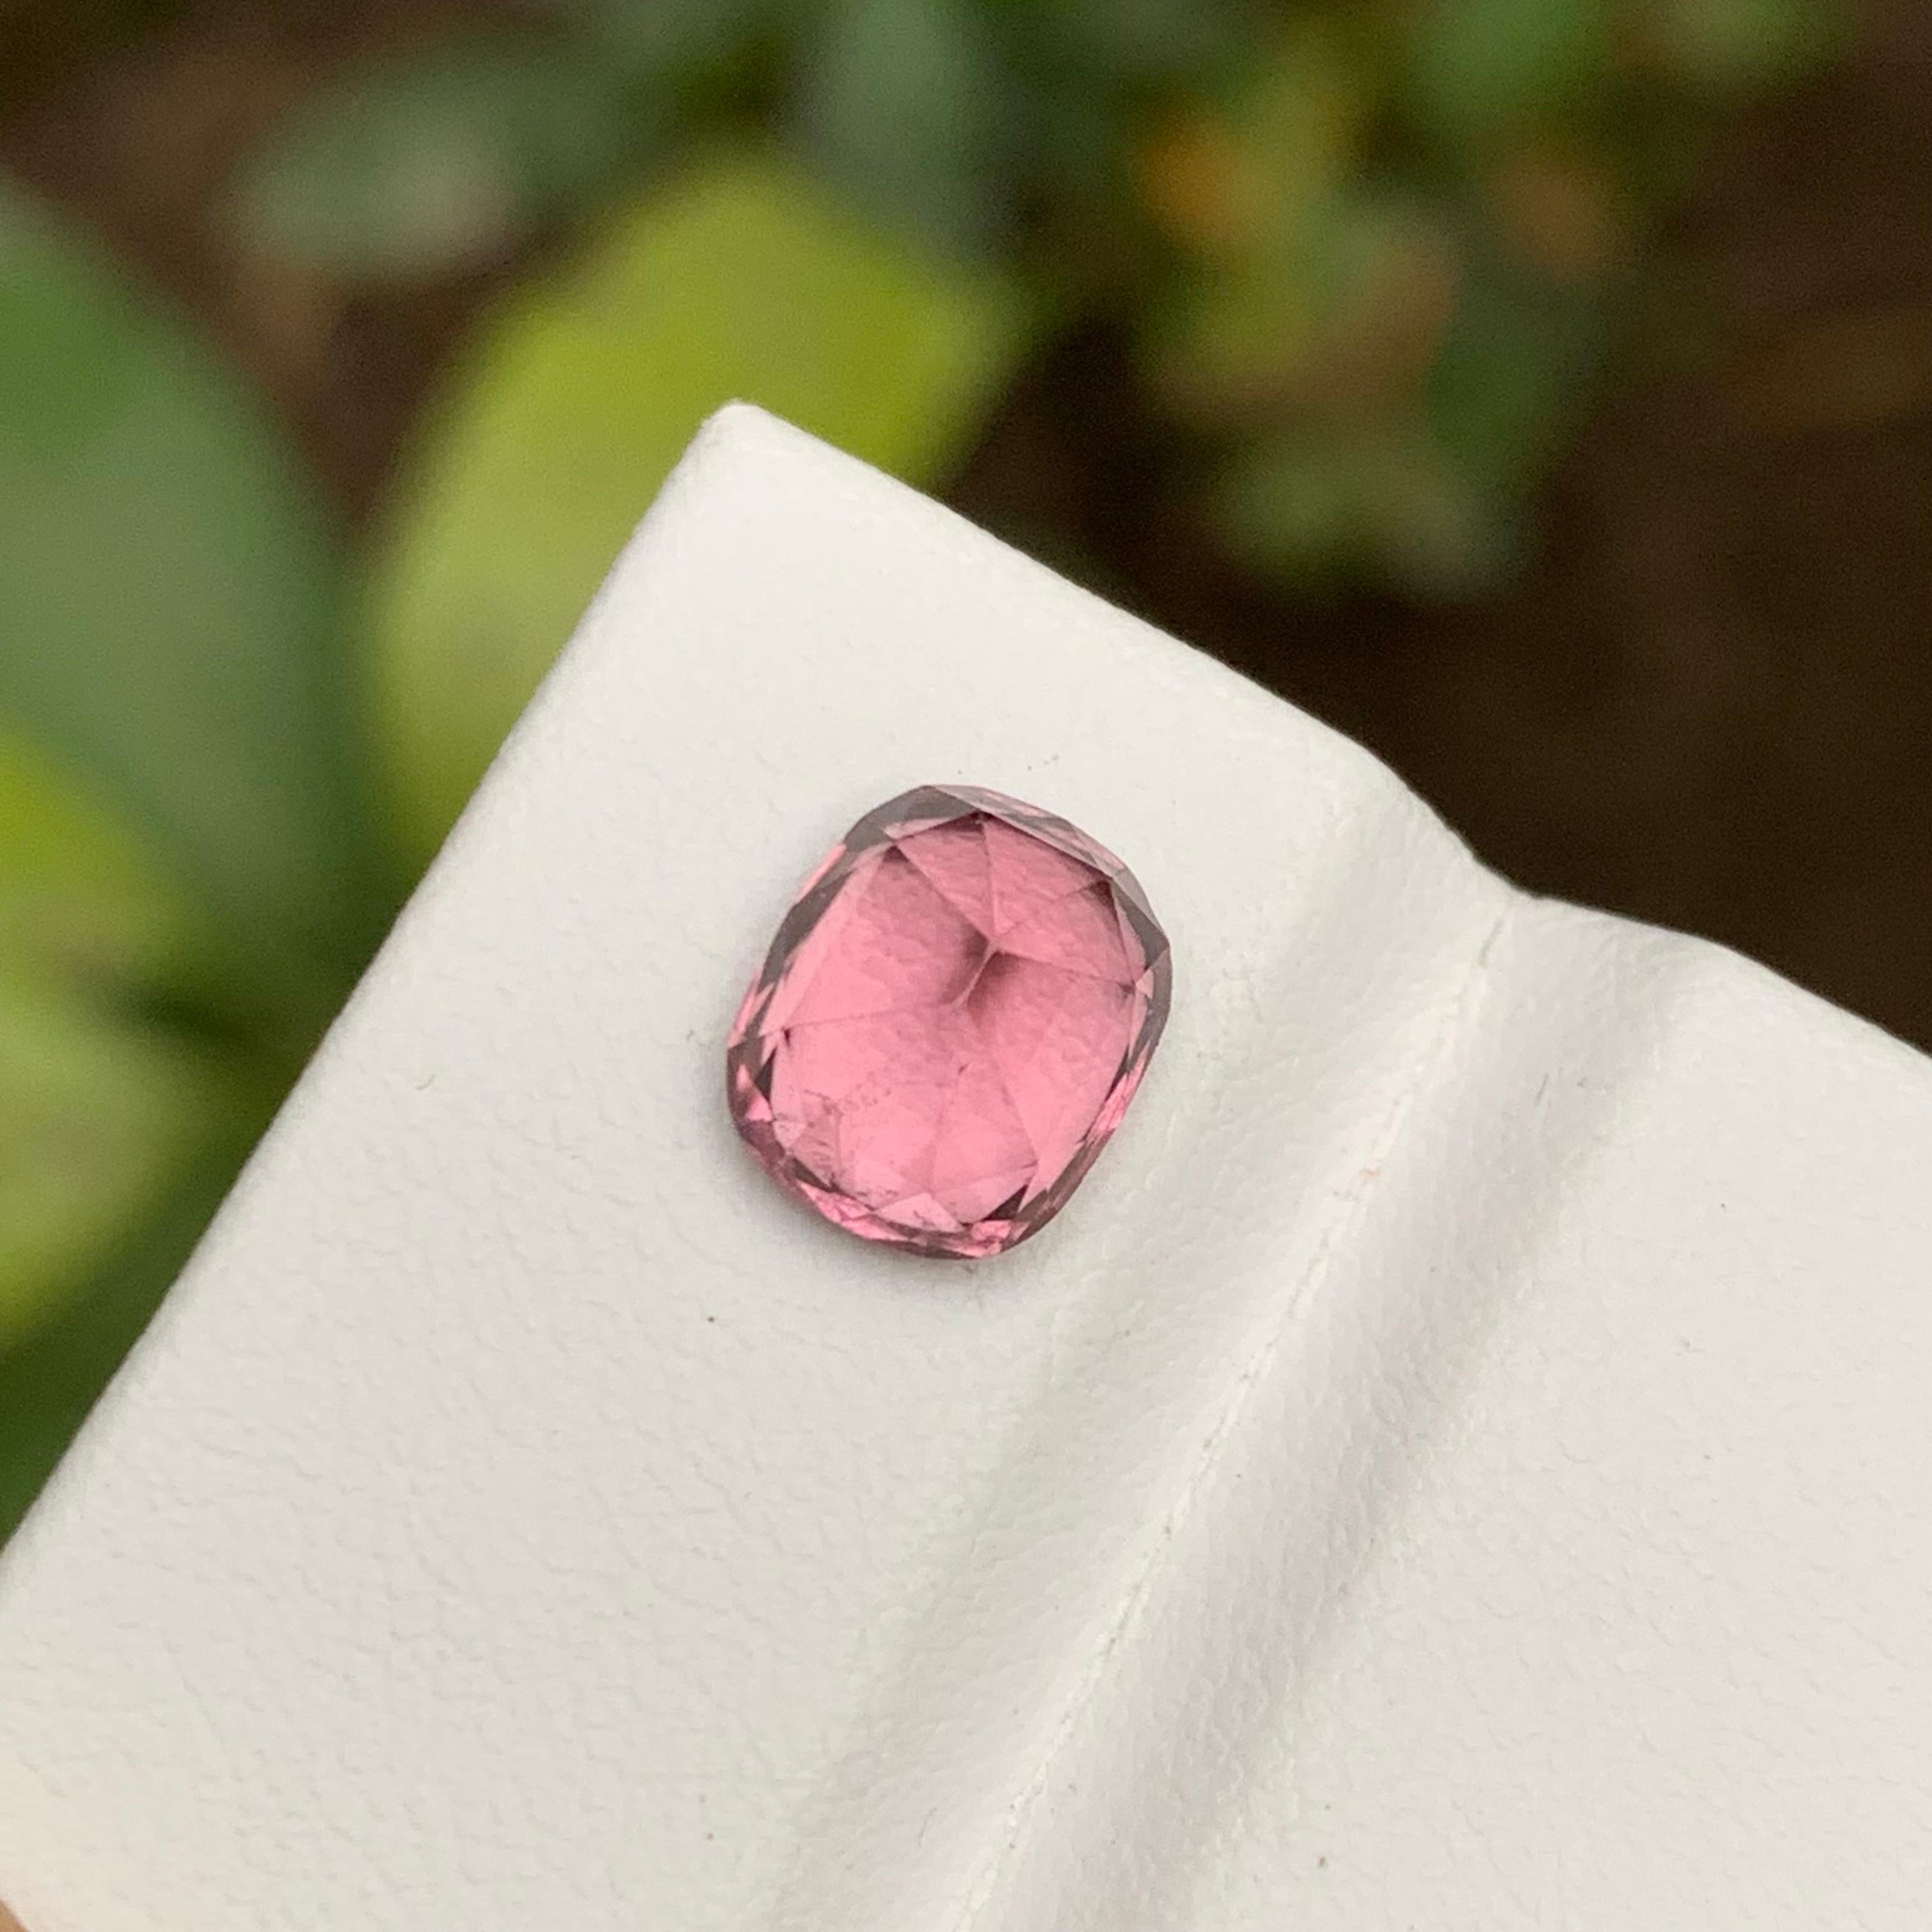 Contemporary Rare Pink Natural Tourmaline Loose Gemstone, 2.65 Carat Cushion Cut for Ring Afg For Sale